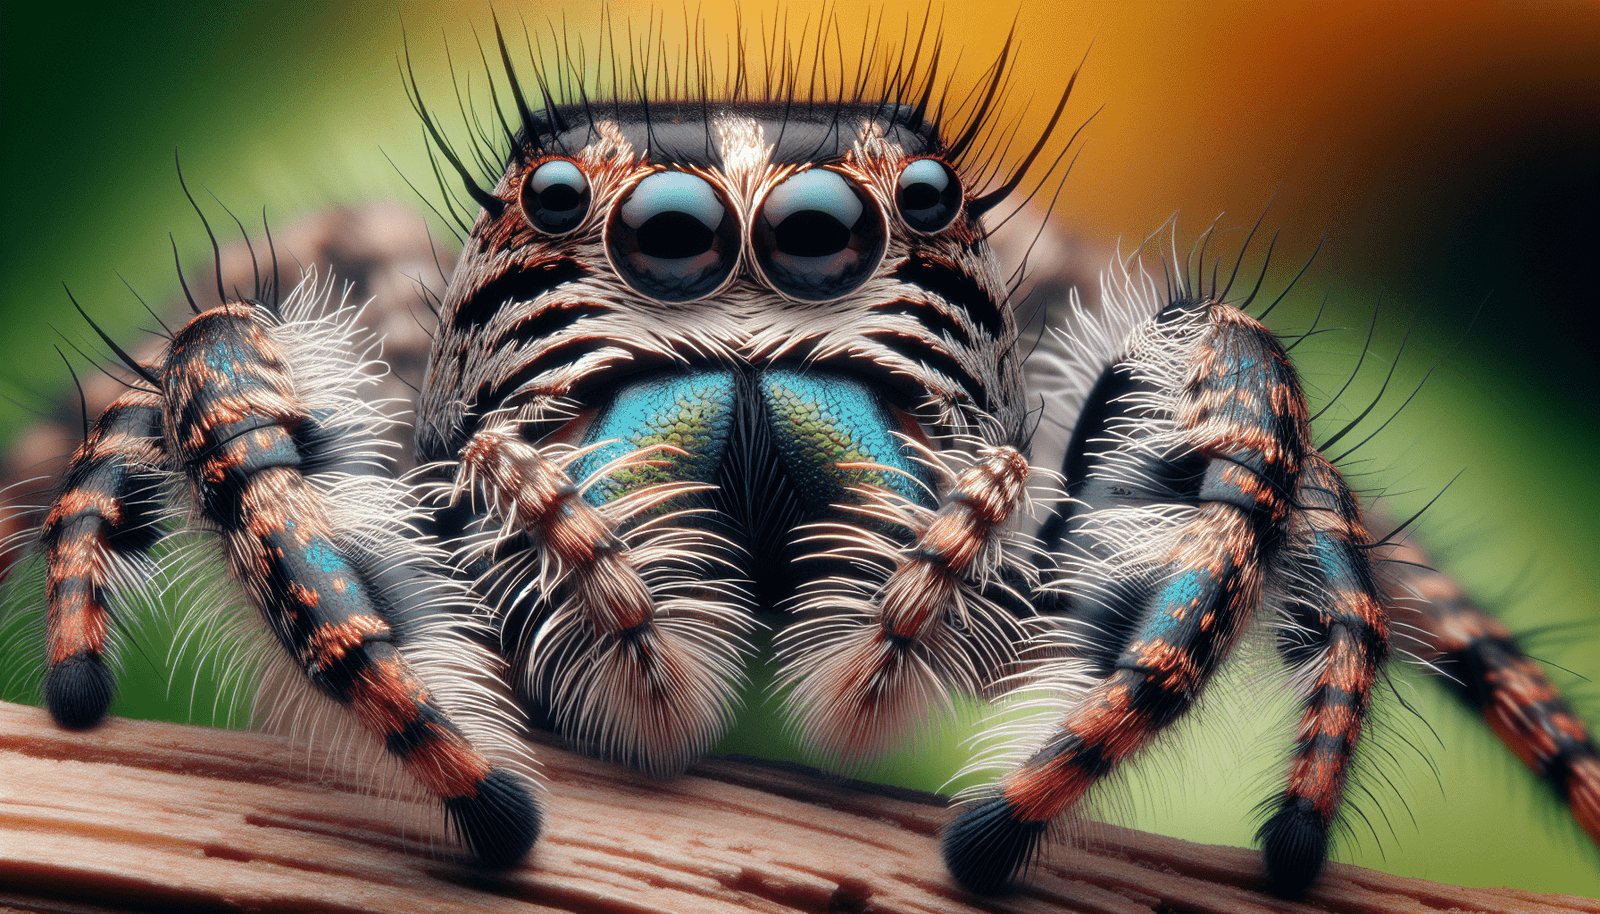 What Are The Behavioral Traits Of The Impressive Regal Jumping Spider, And How Is It Cared For In Captivity?